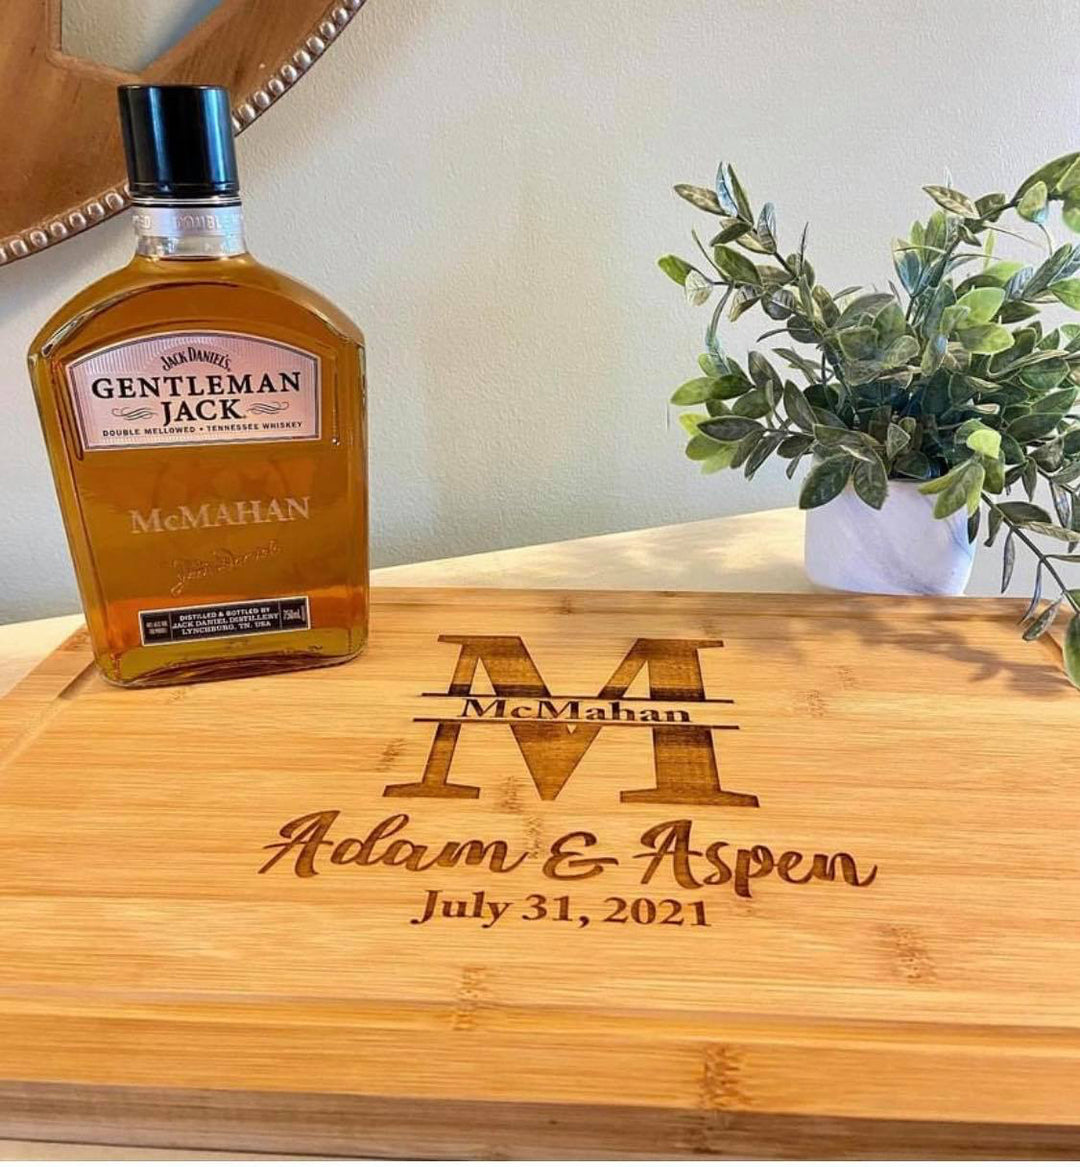 Personalized Engraved Spirits - Bring Your Own Bottle!